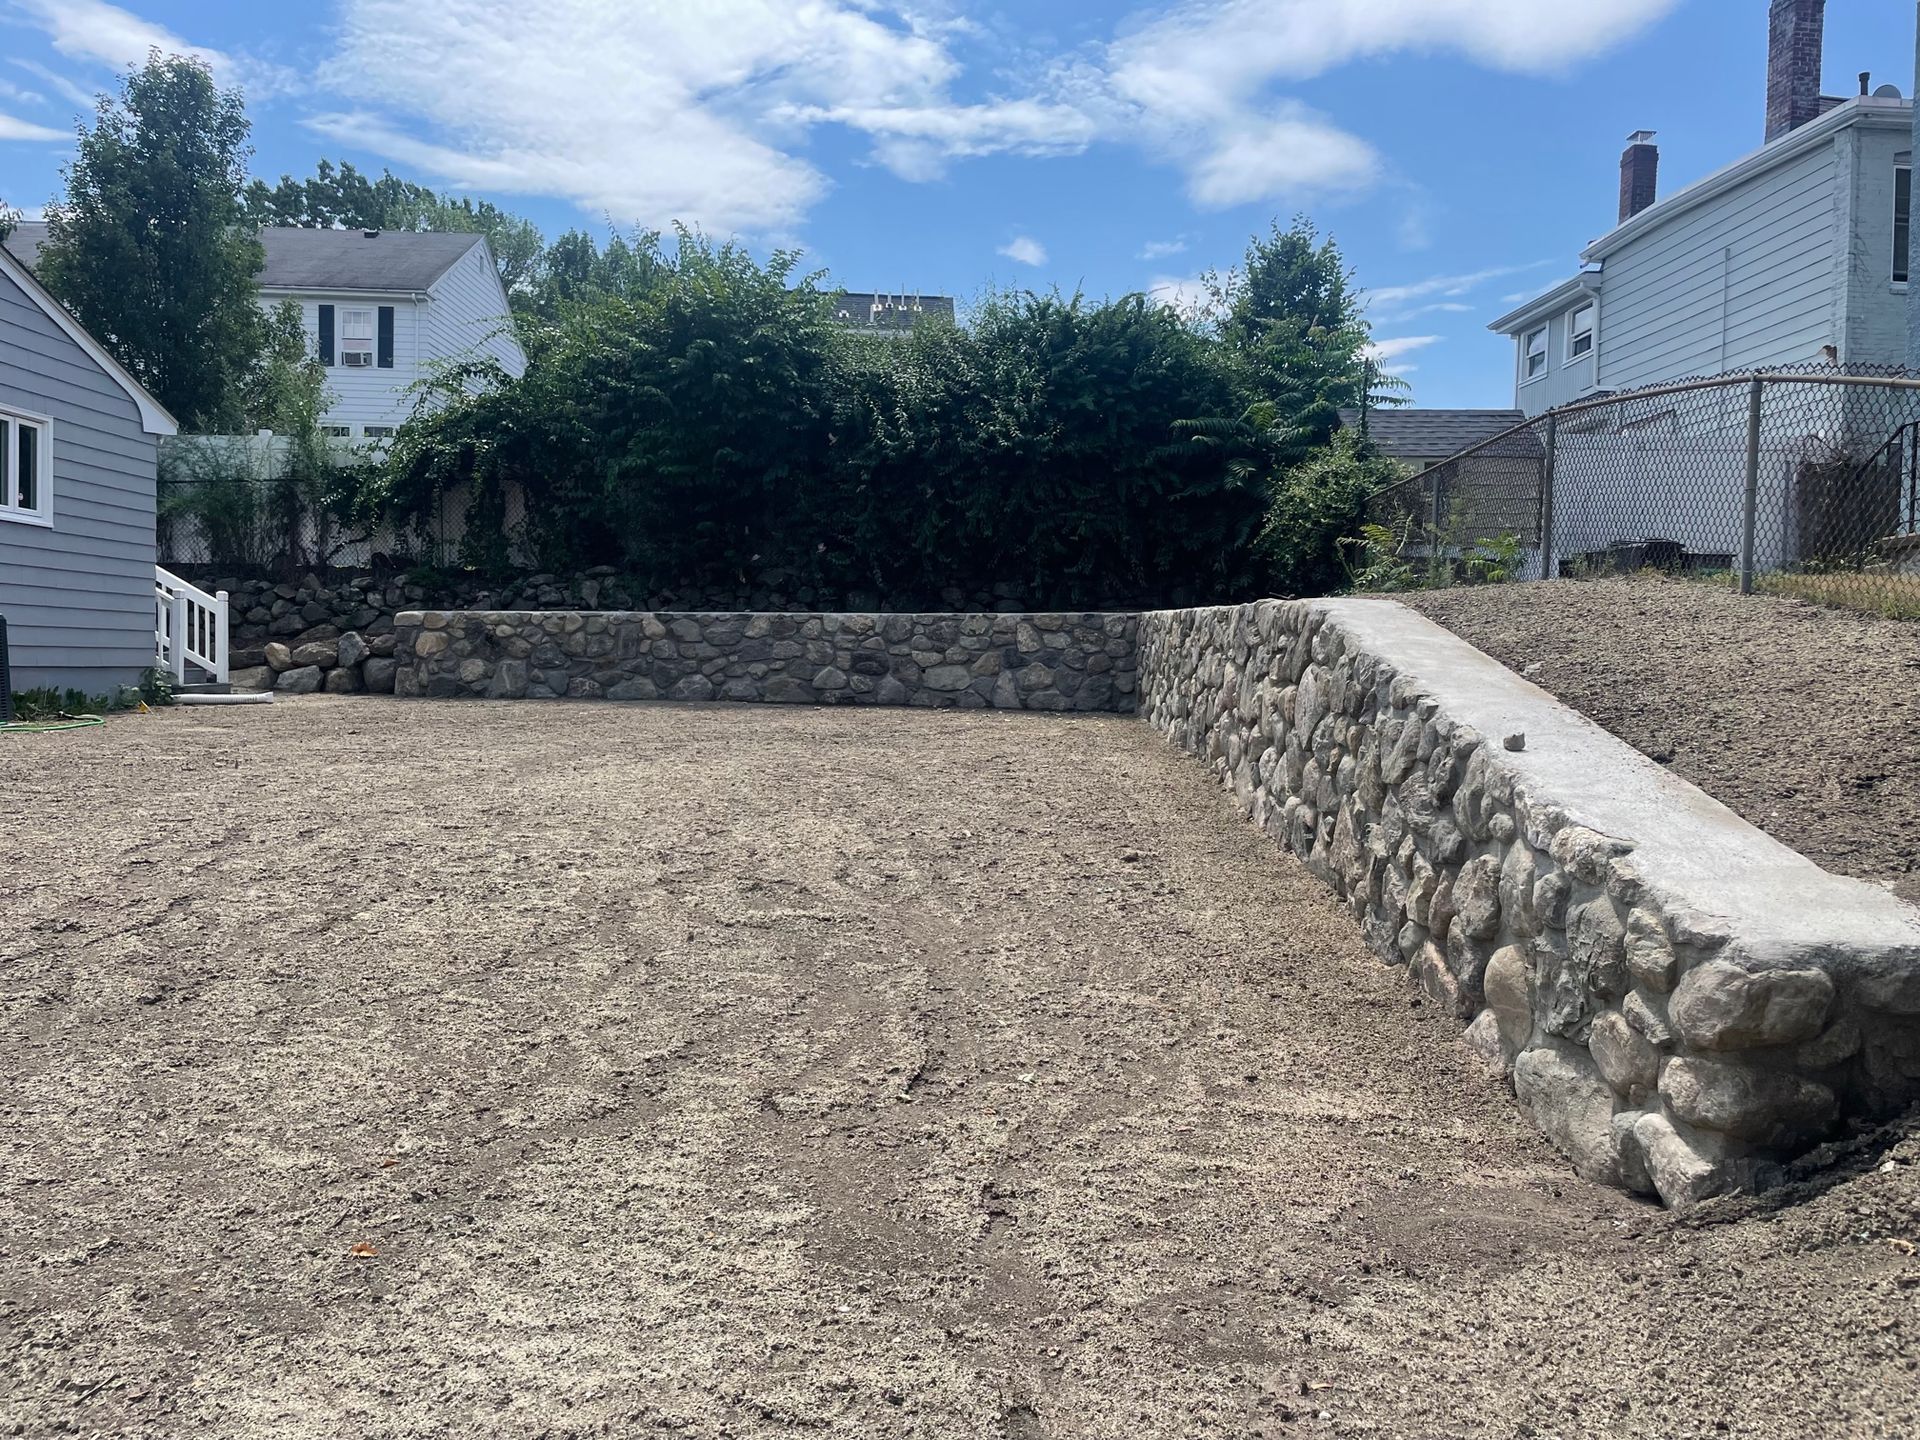 Stone wall installation. Stone wall design contractors in Arlington, MA. Excavation and grading project. Demolition of old stone wall and install new one. 